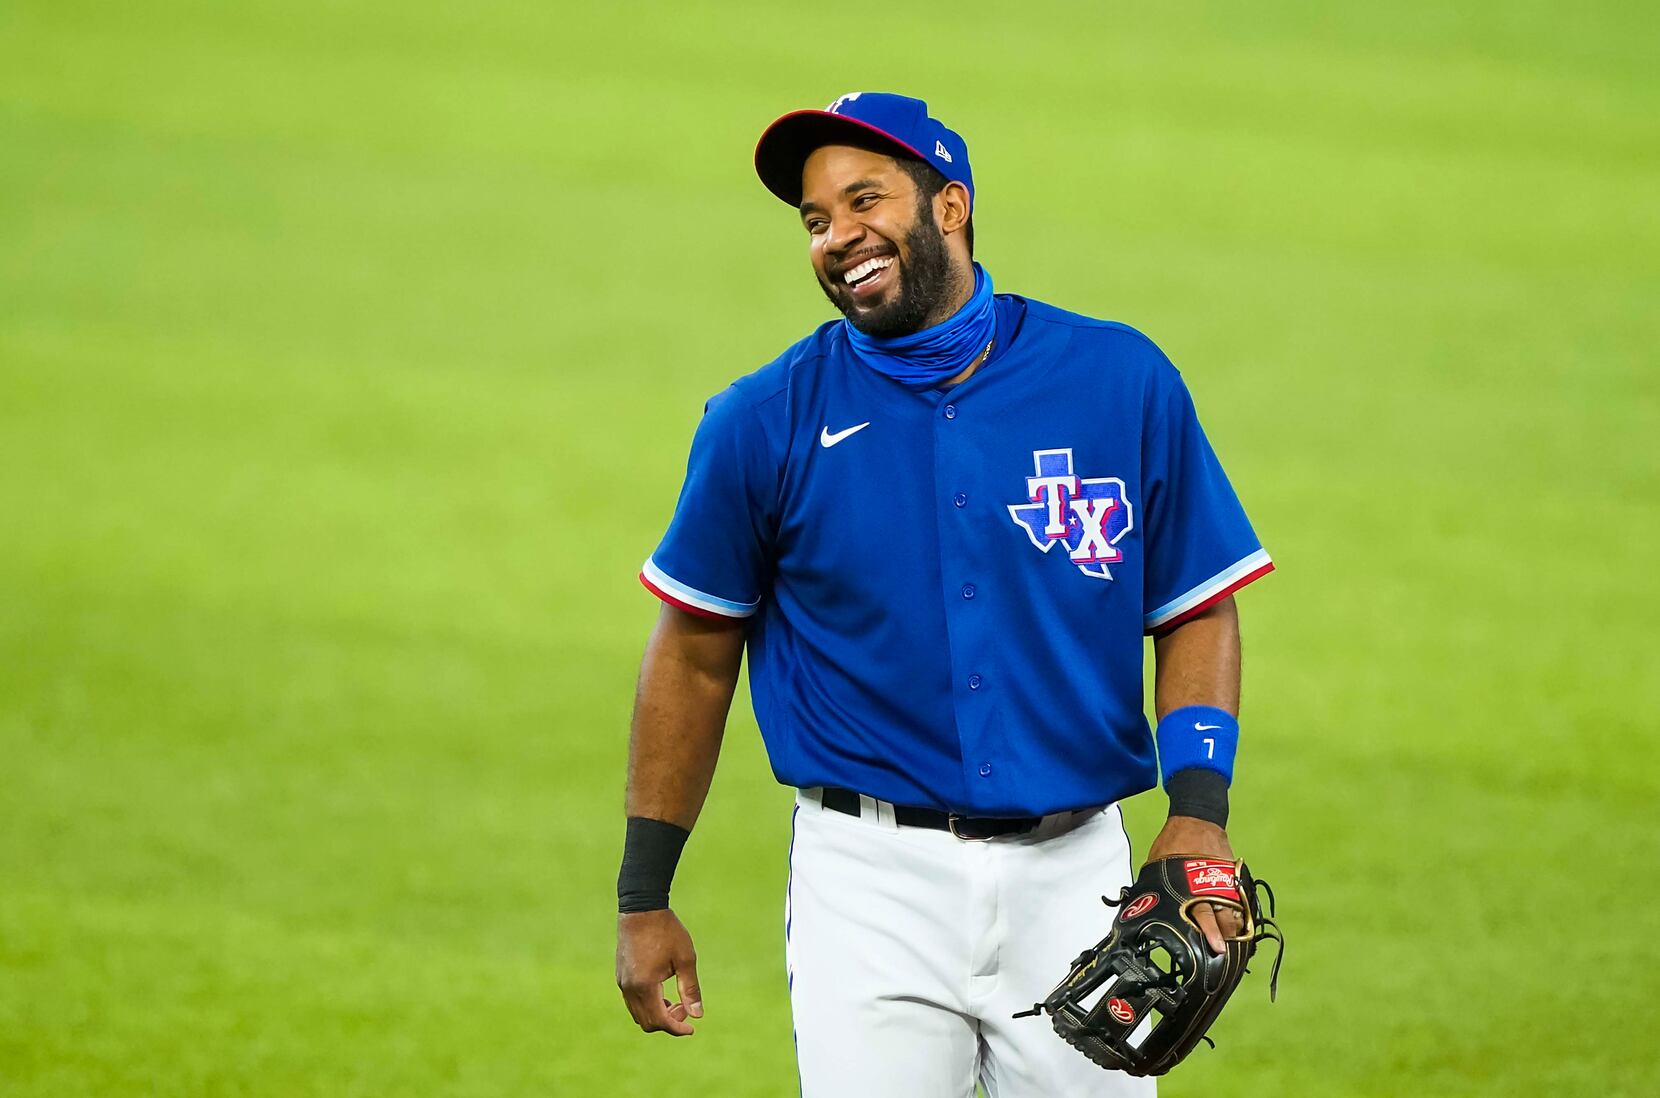 Elvis Andrus is the new face of the Texas Rangers. This is why he's ready.